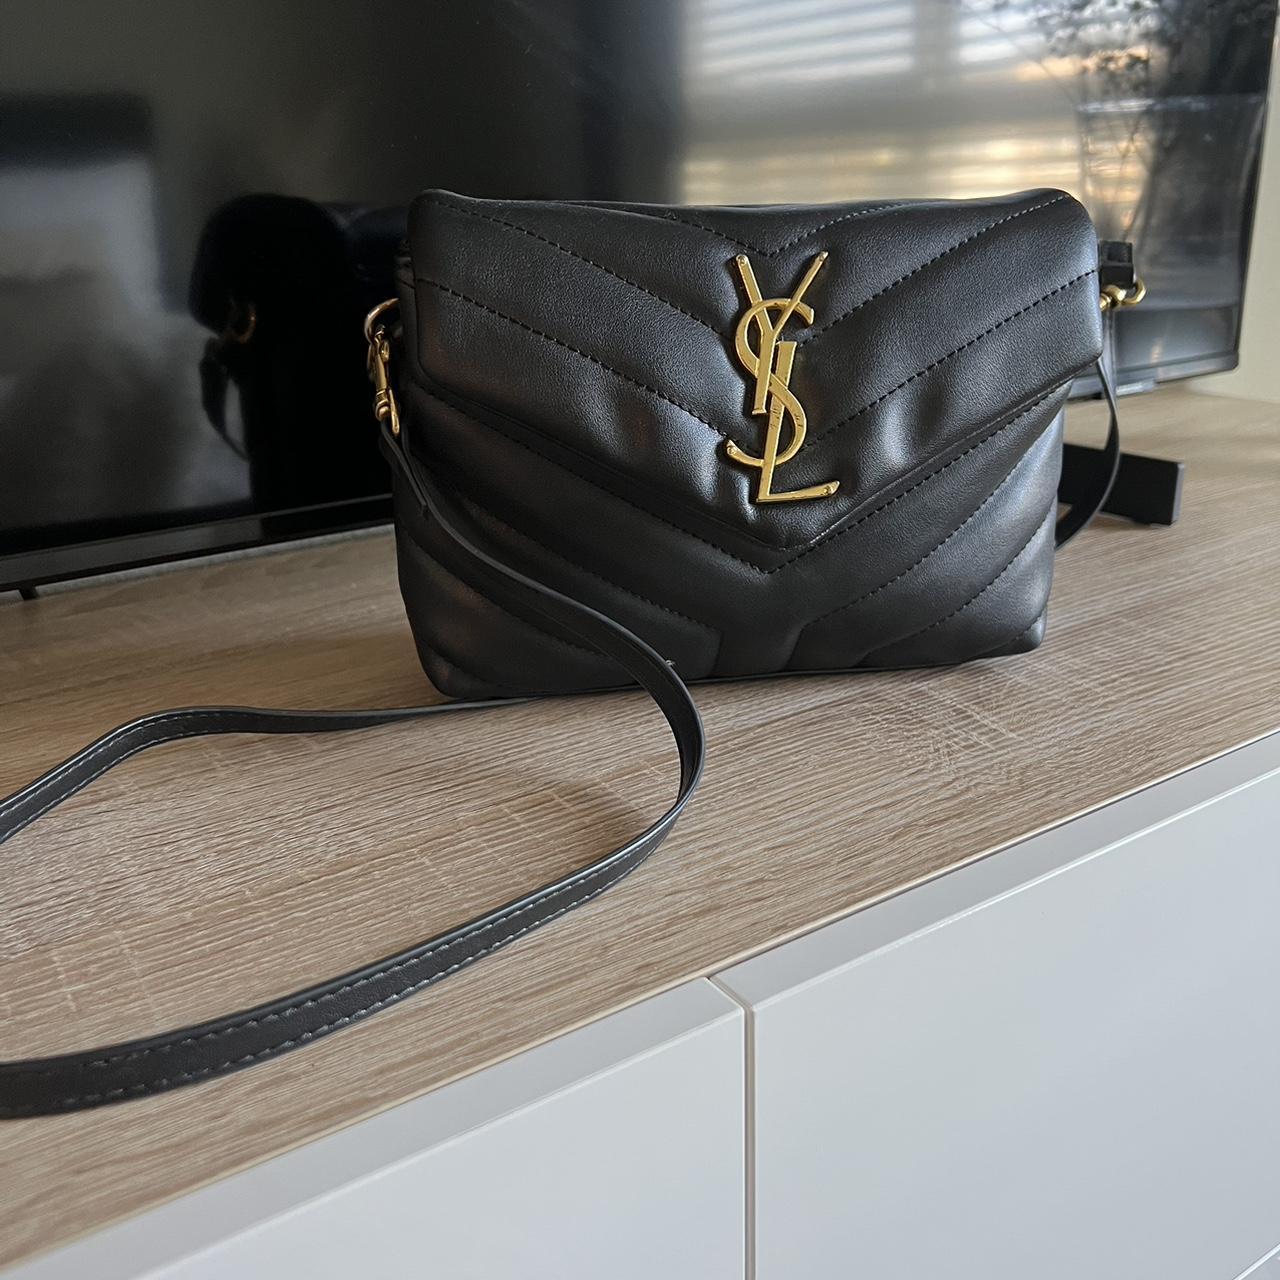 Authentic YSL bag, in great condition only inside - Depop